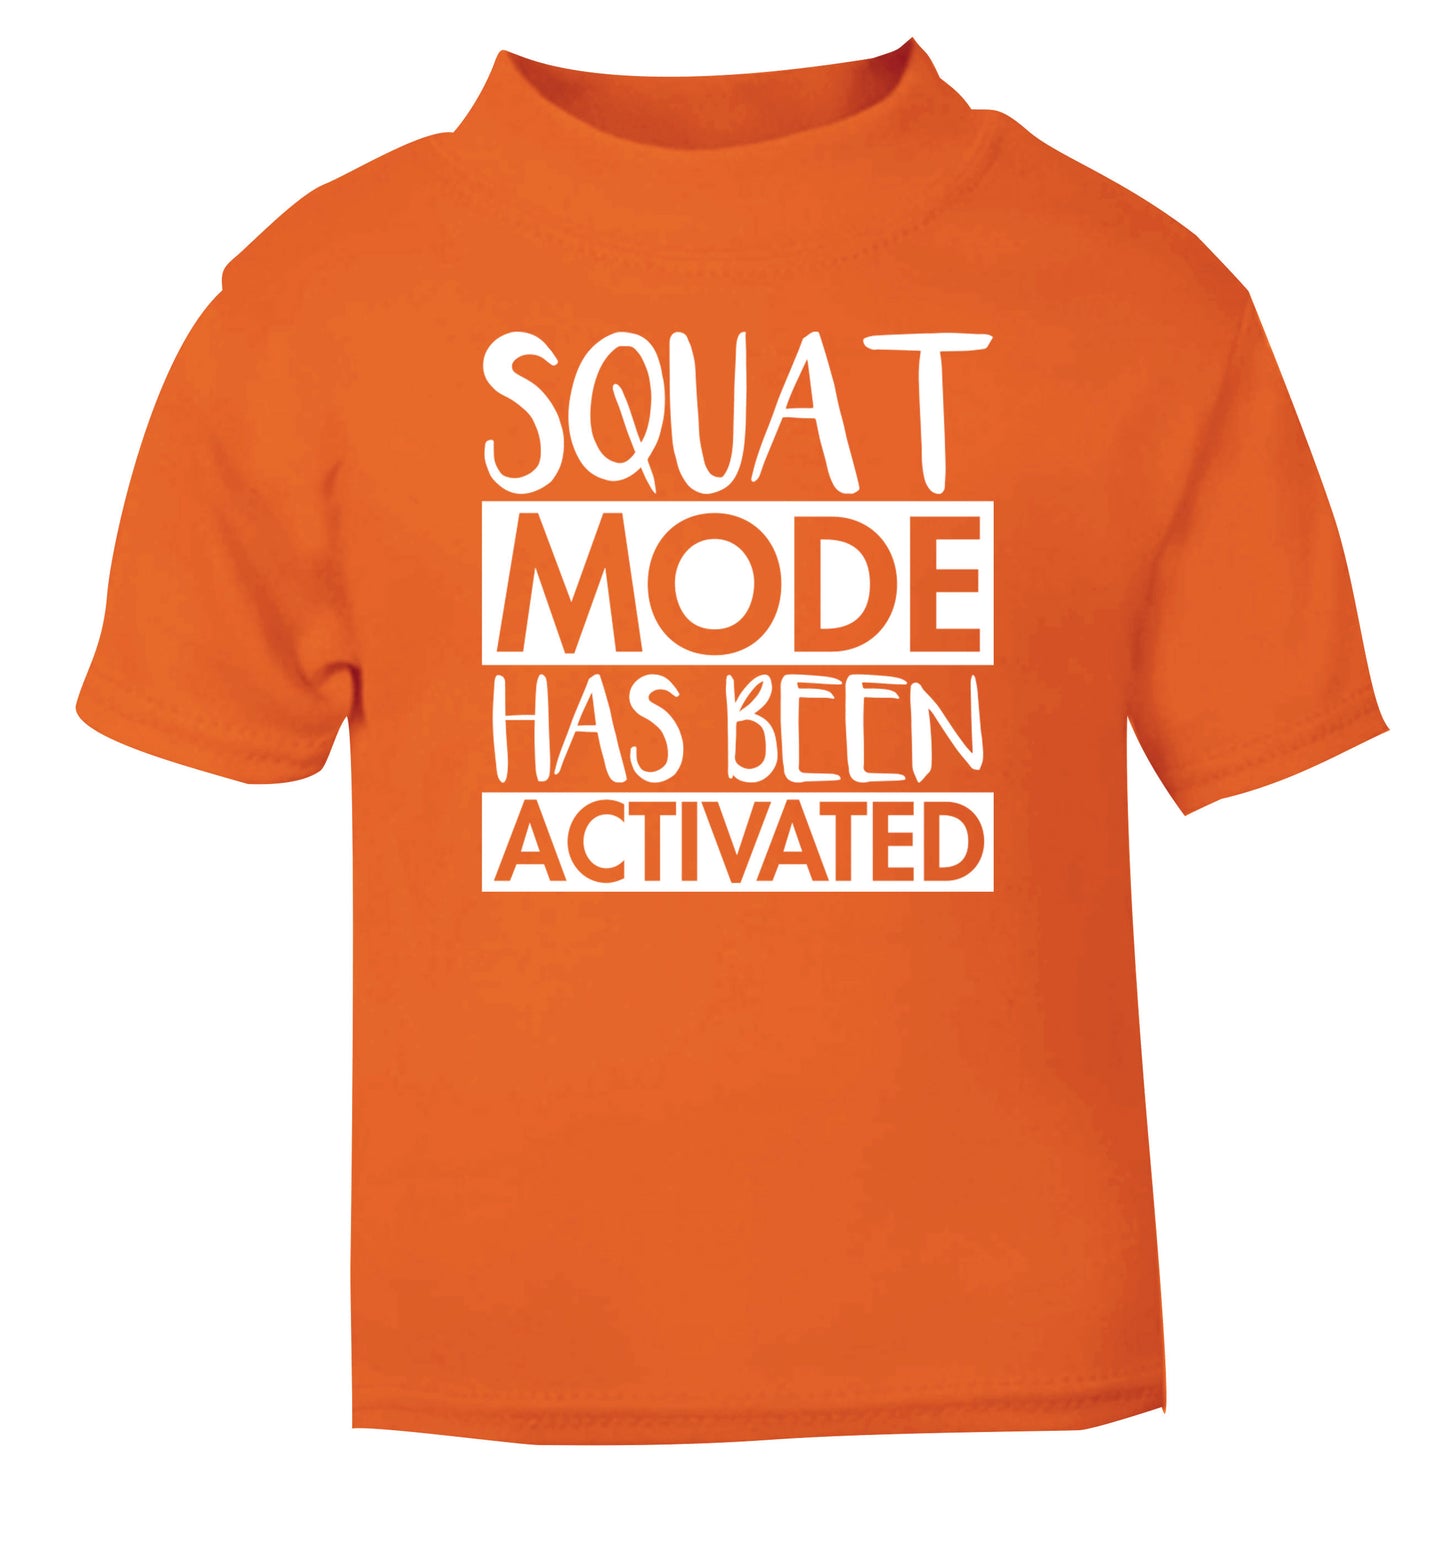 Squat mode activated orange Baby Toddler Tshirt 2 Years